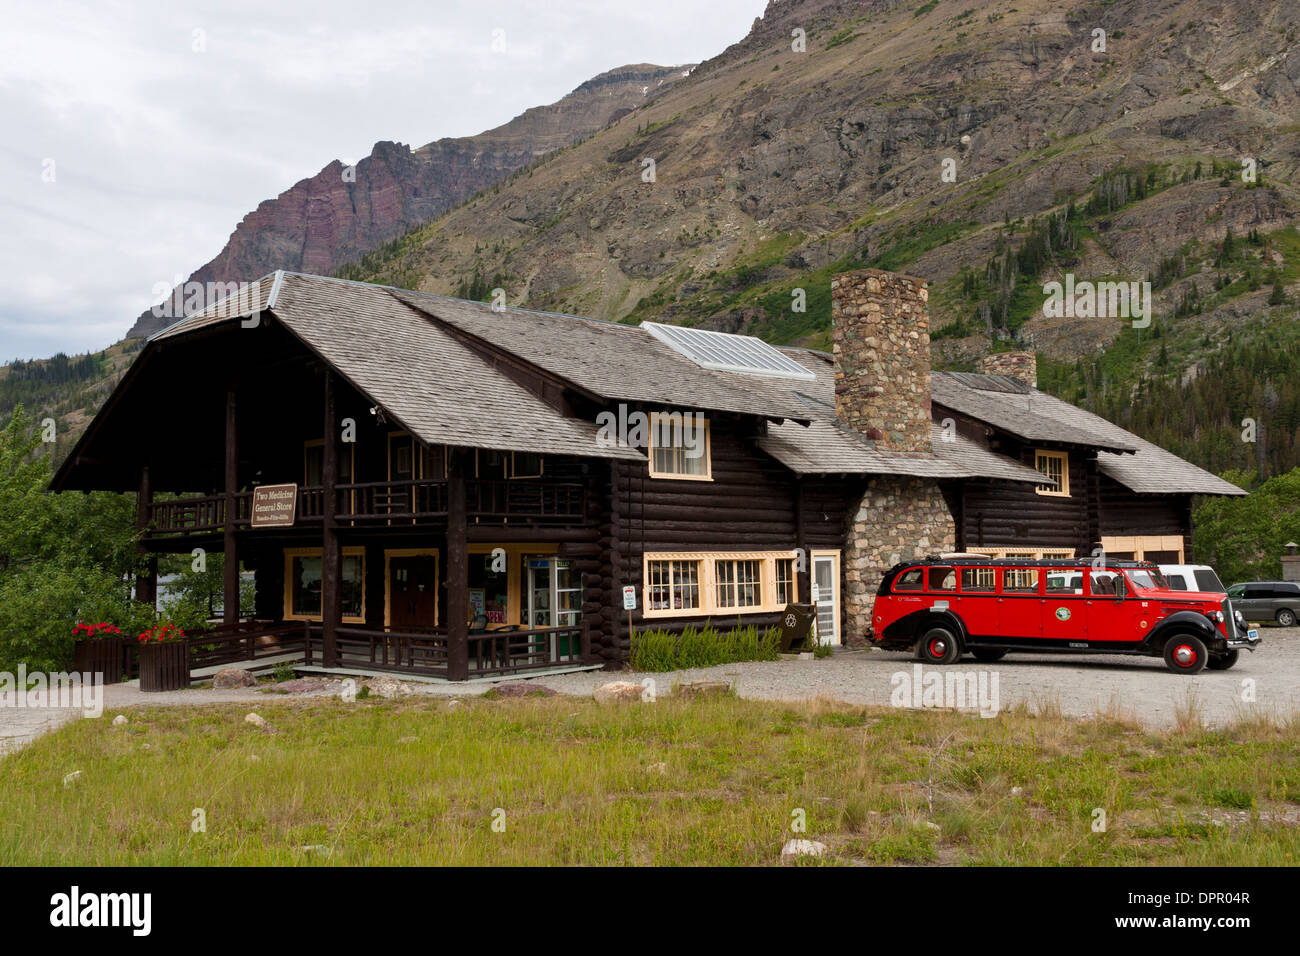 Red Jammer Bus at Two Medicine General Store in Glacier National Park, Montana. Stock Photo